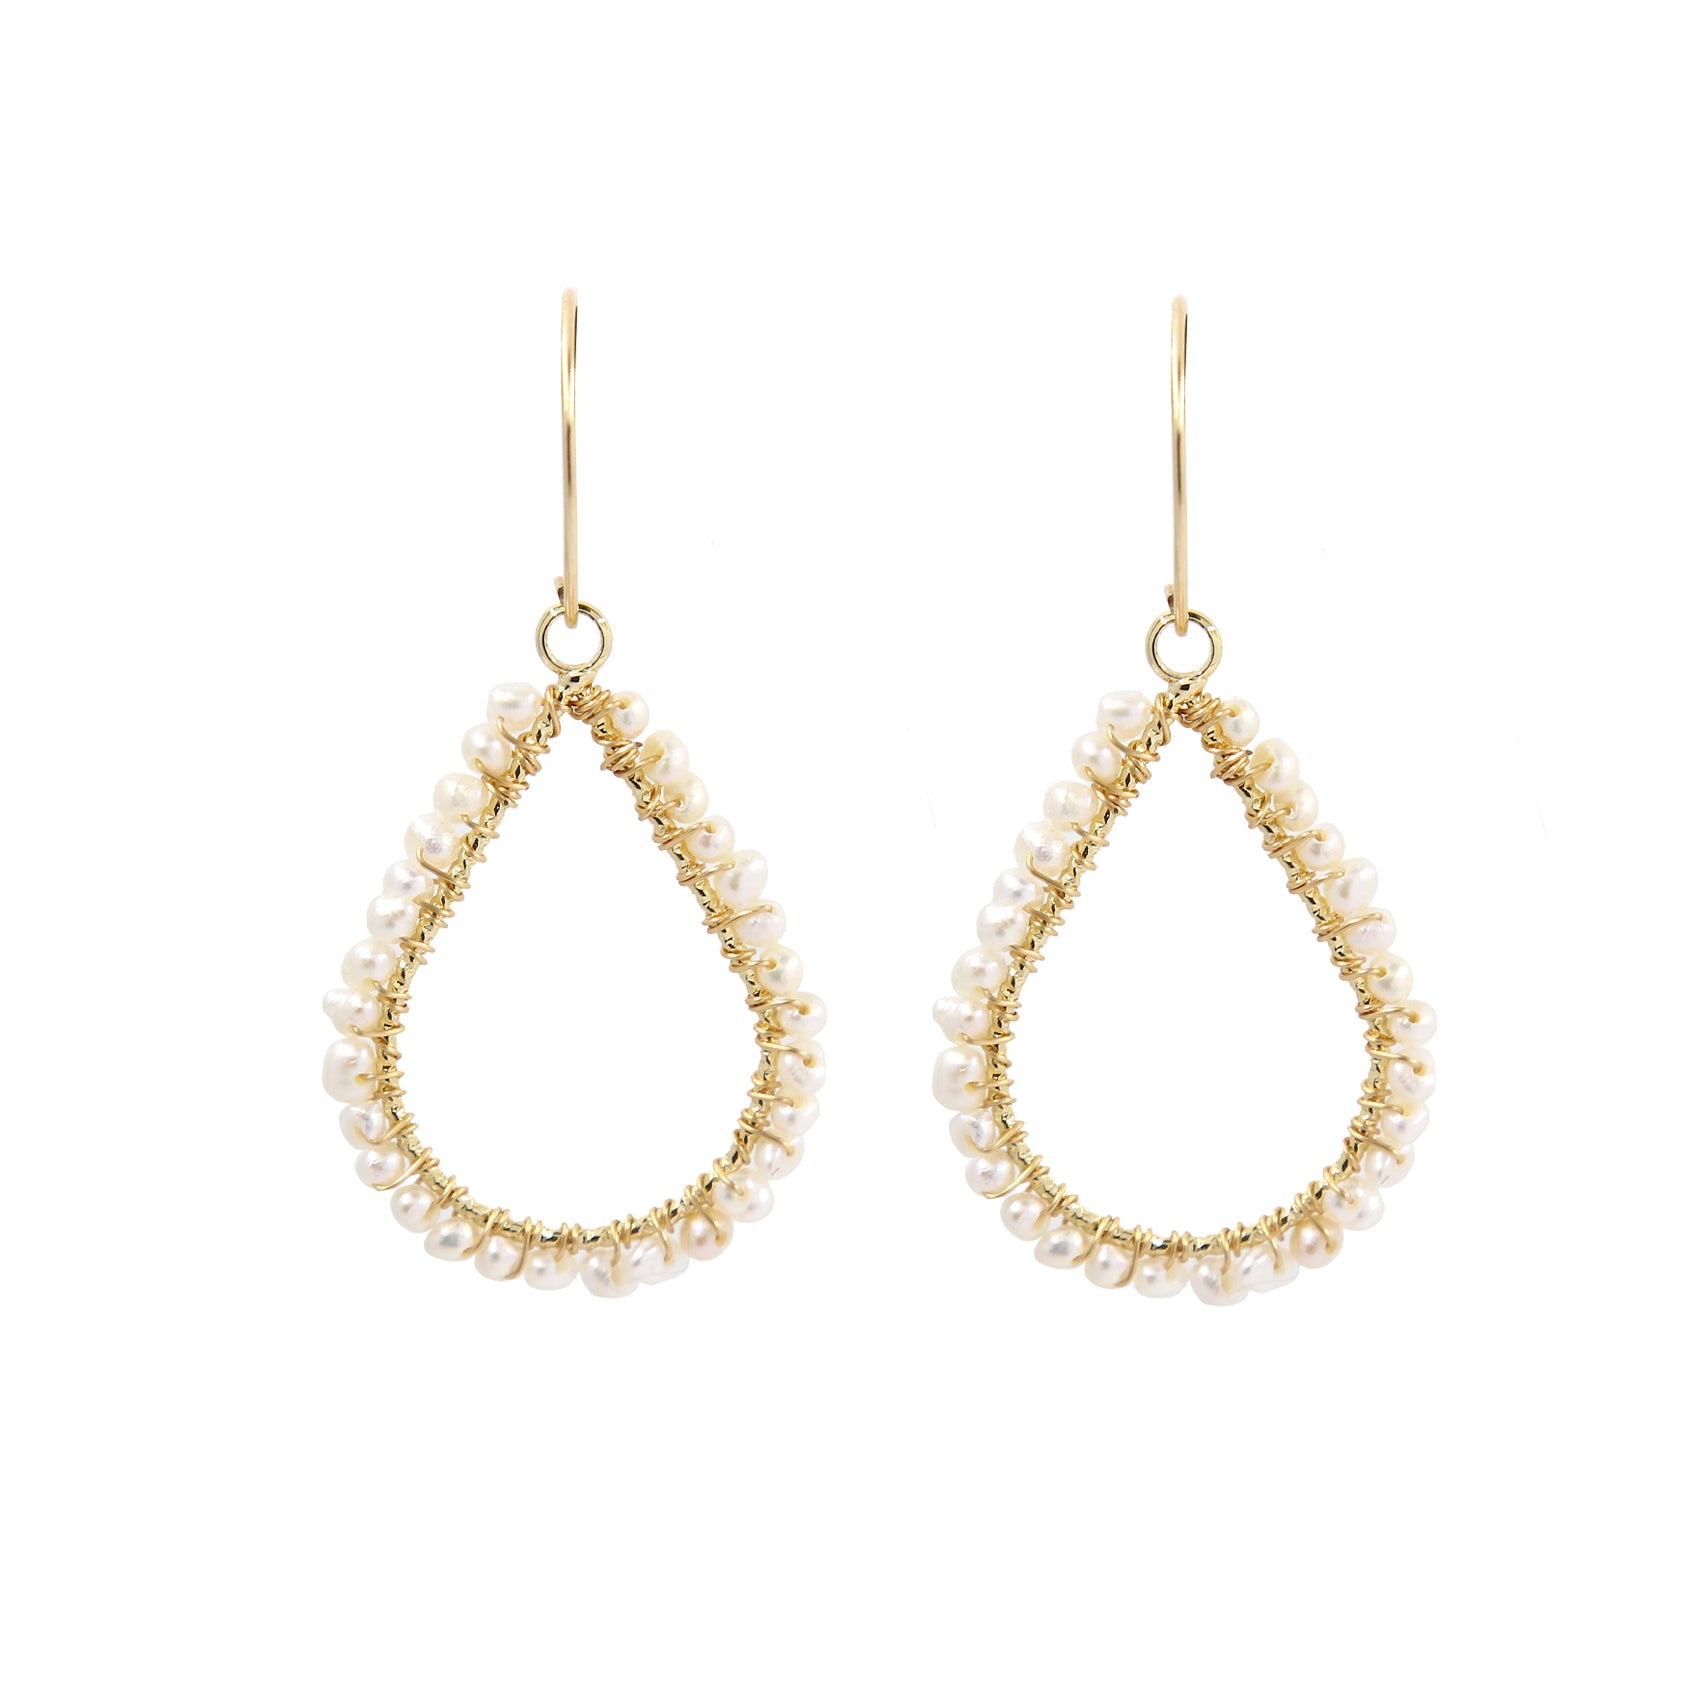 Discover Unique Chiyo Beaded Earrings